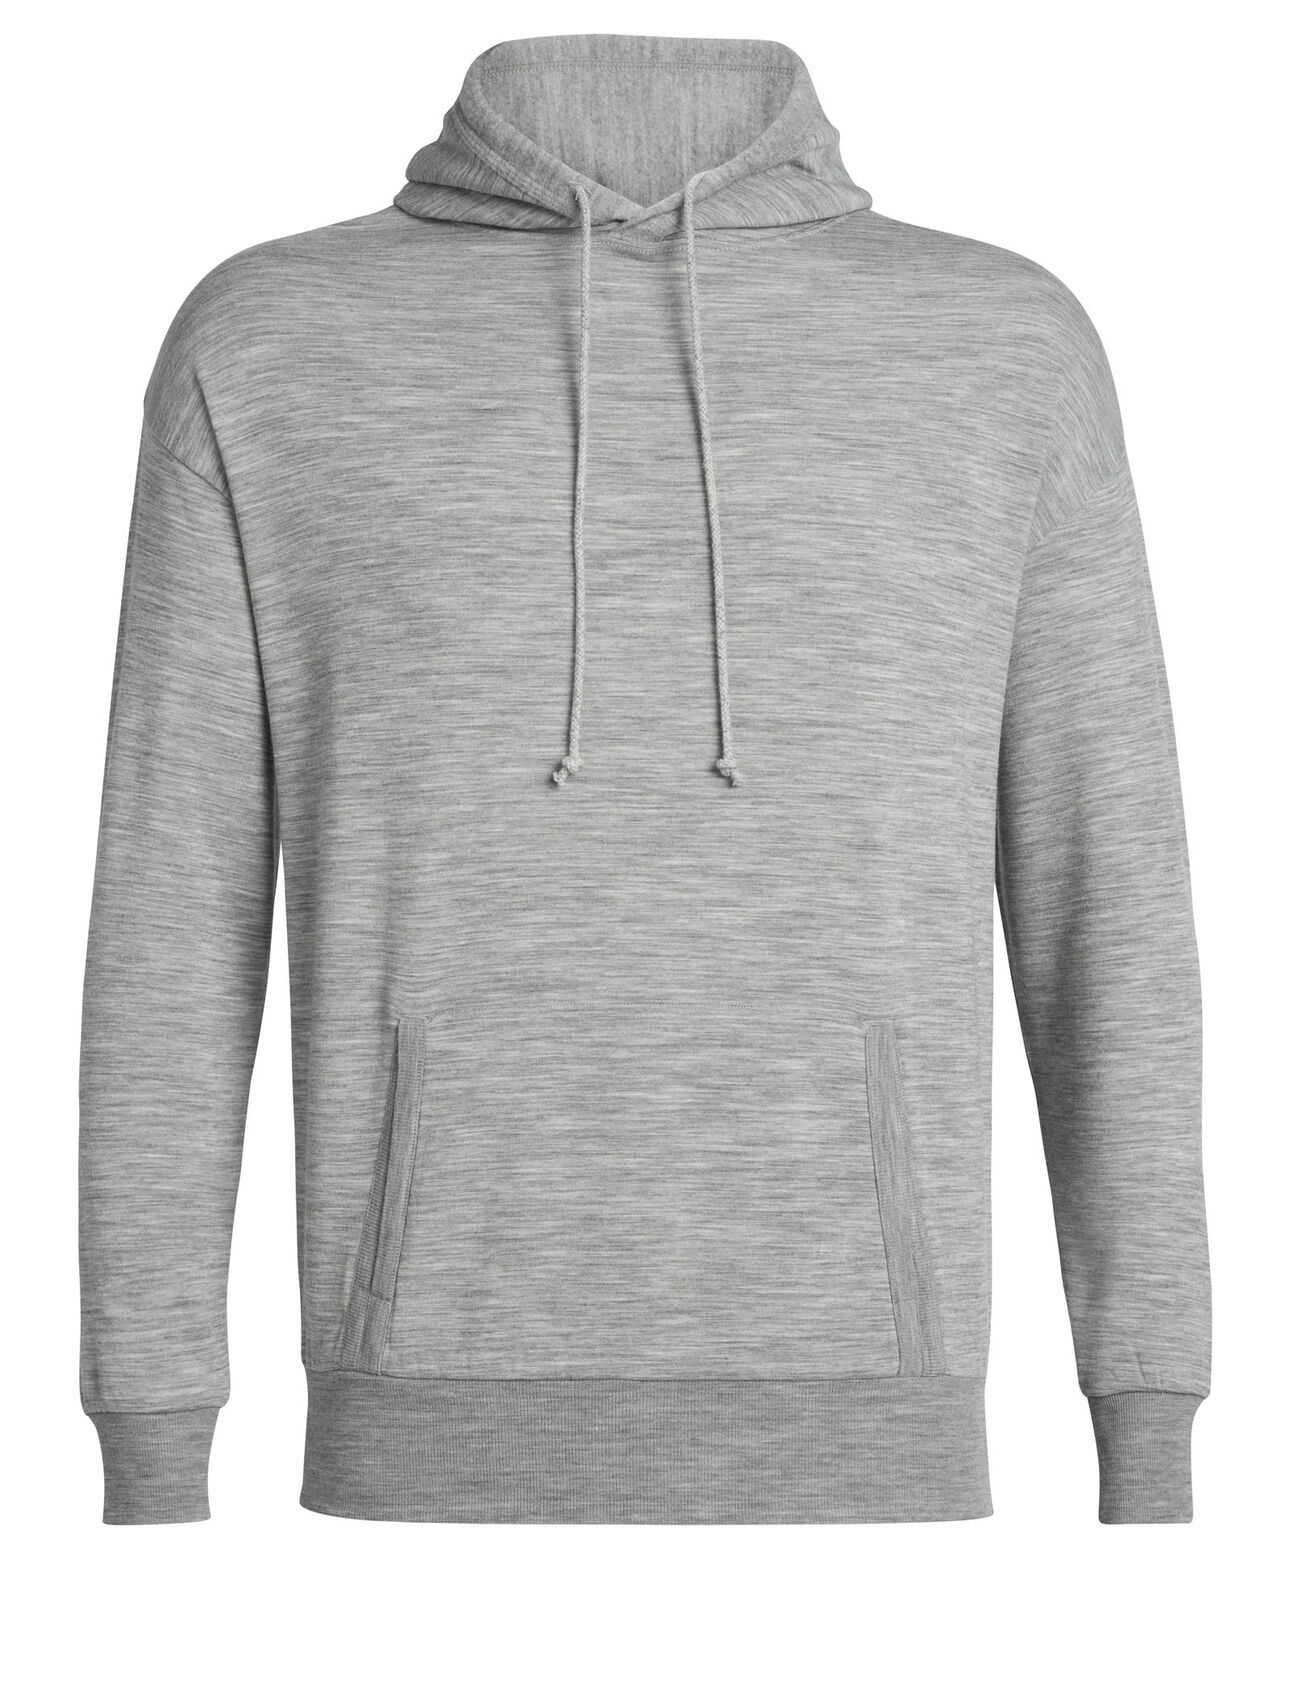 Download Download Mens Heather Pullover Hoodie Back View Of Hooded ...